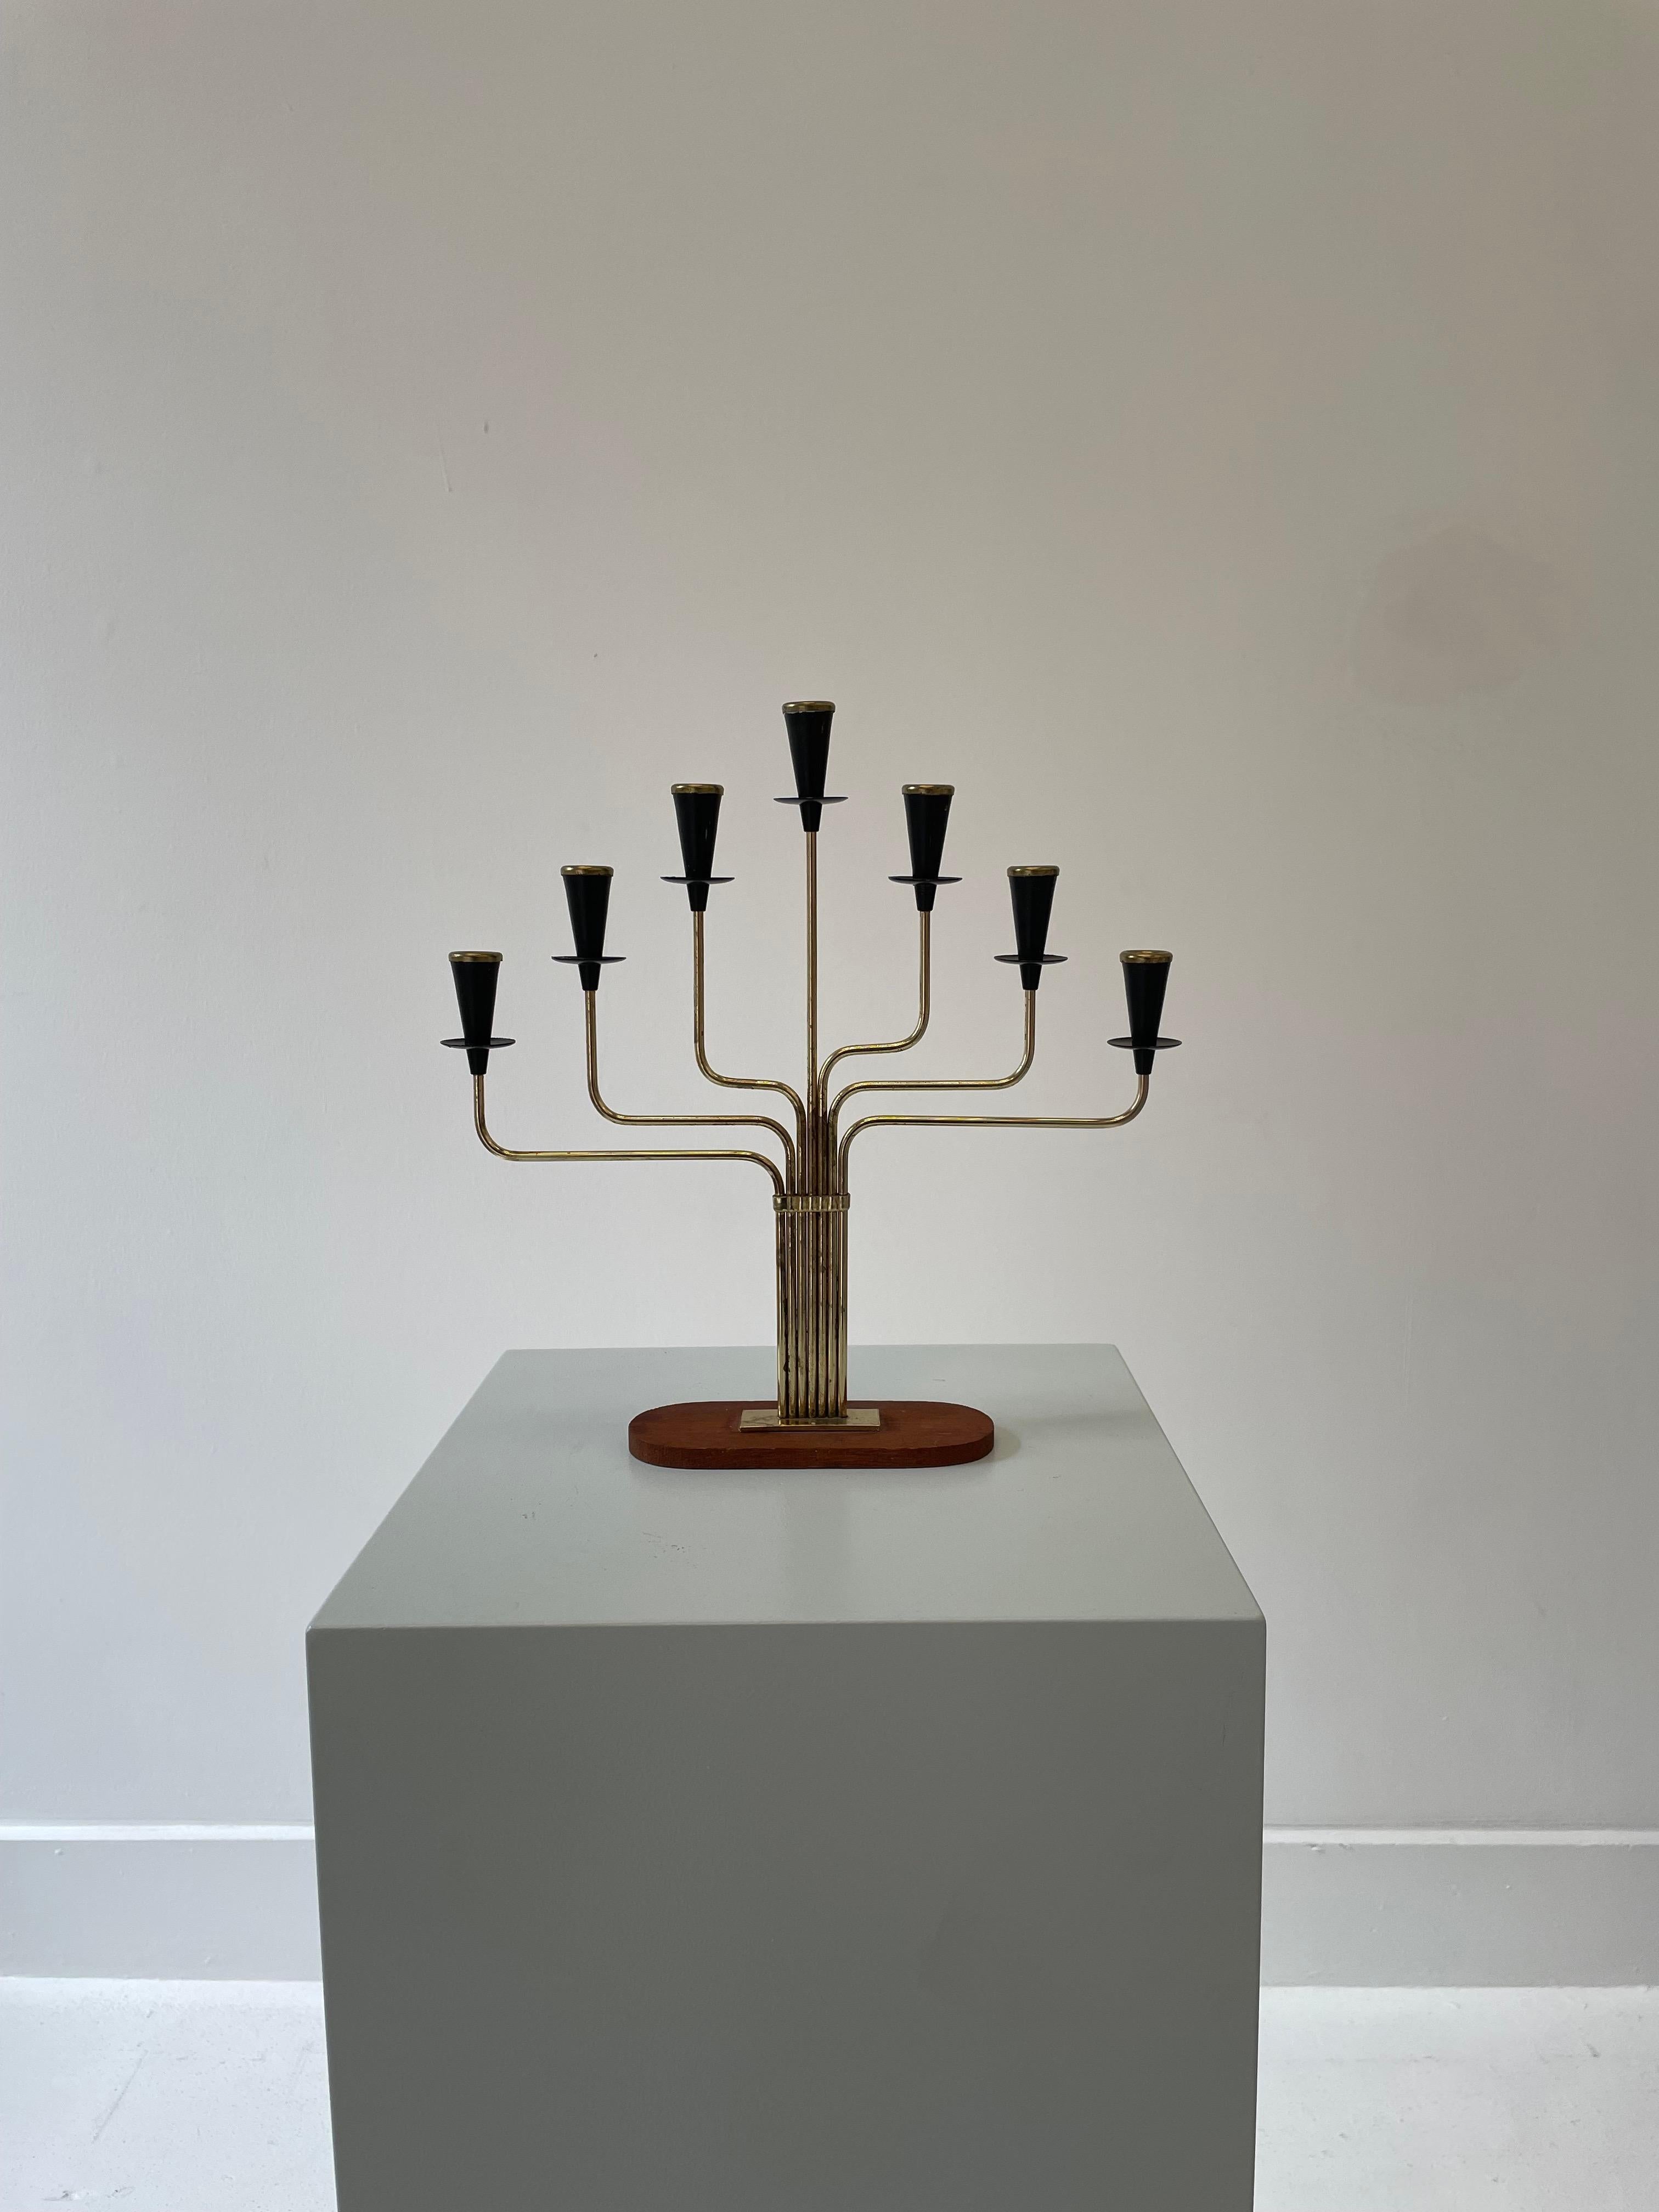 Height: 27cm
Width: 29cm
Depth: 6cm

Designer: Gunnar Ander 
Date: 1950s
Materials: Teak, brass, patinated brass

Description: Six candleholders flay the central post in this design. The brass has even patination across the surface.
